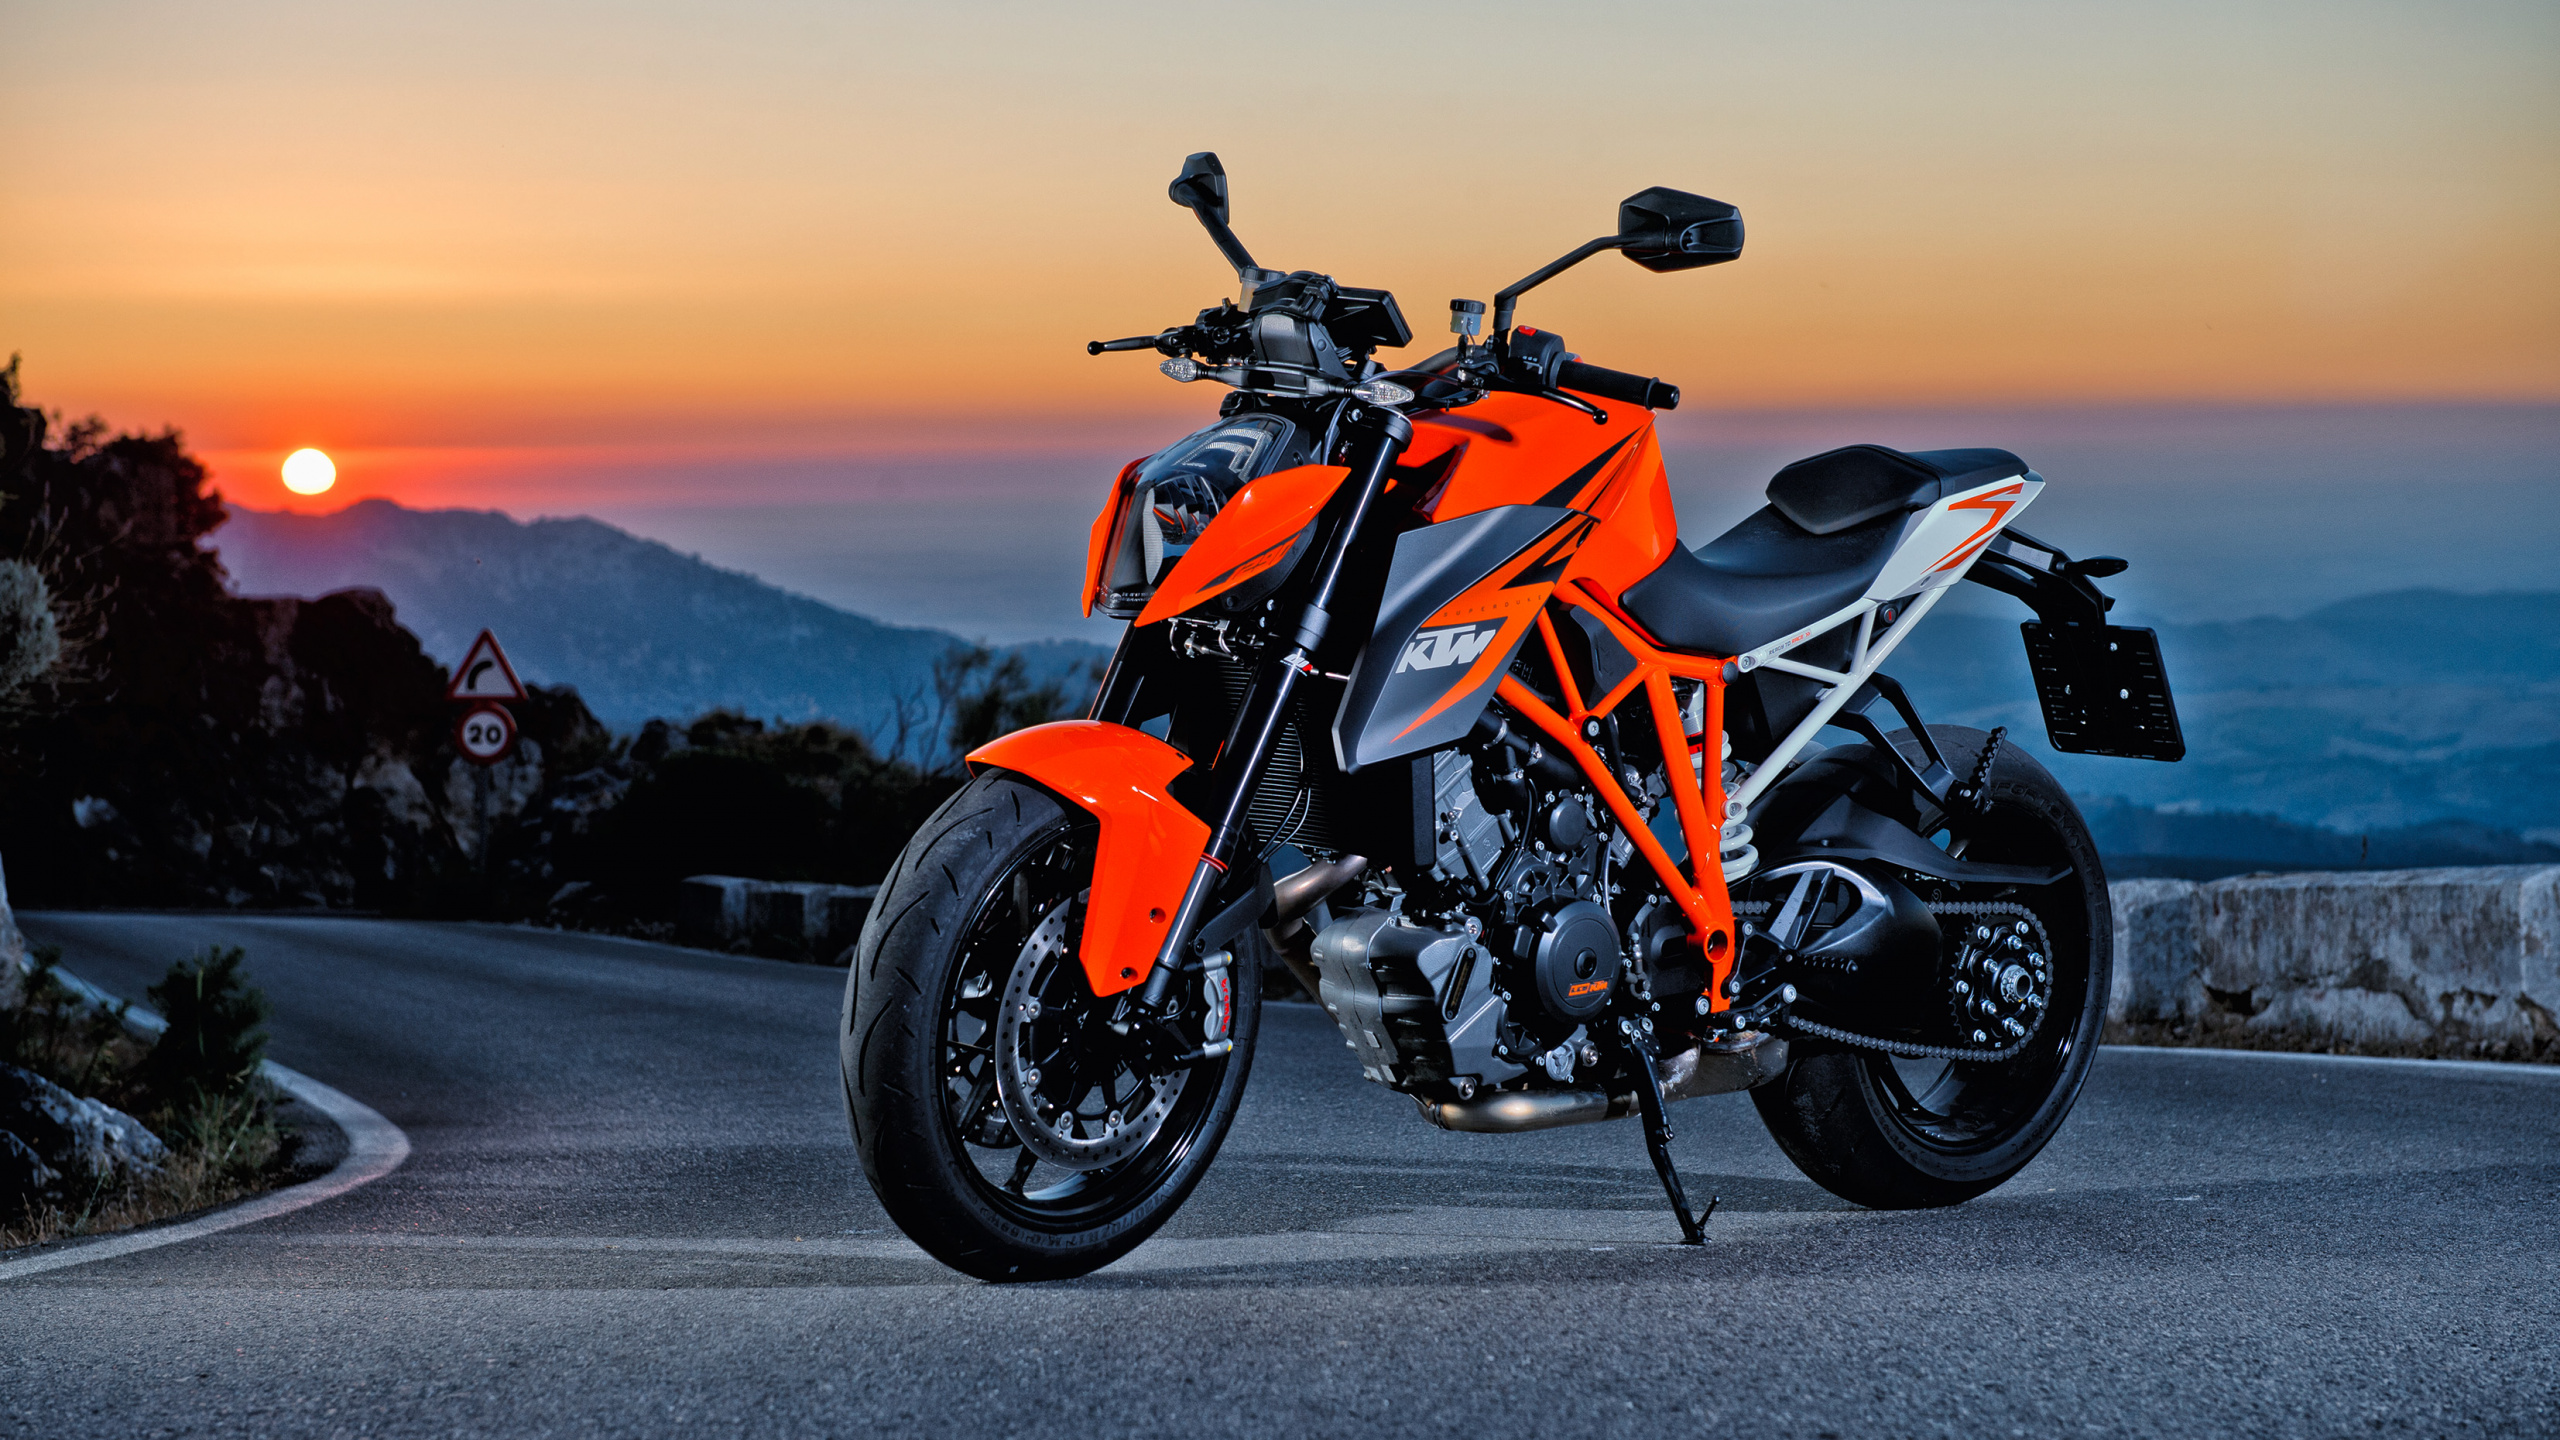 Orange and Black Sports Bike on Road During Daytime. Wallpaper in 2560x1440 Resolution